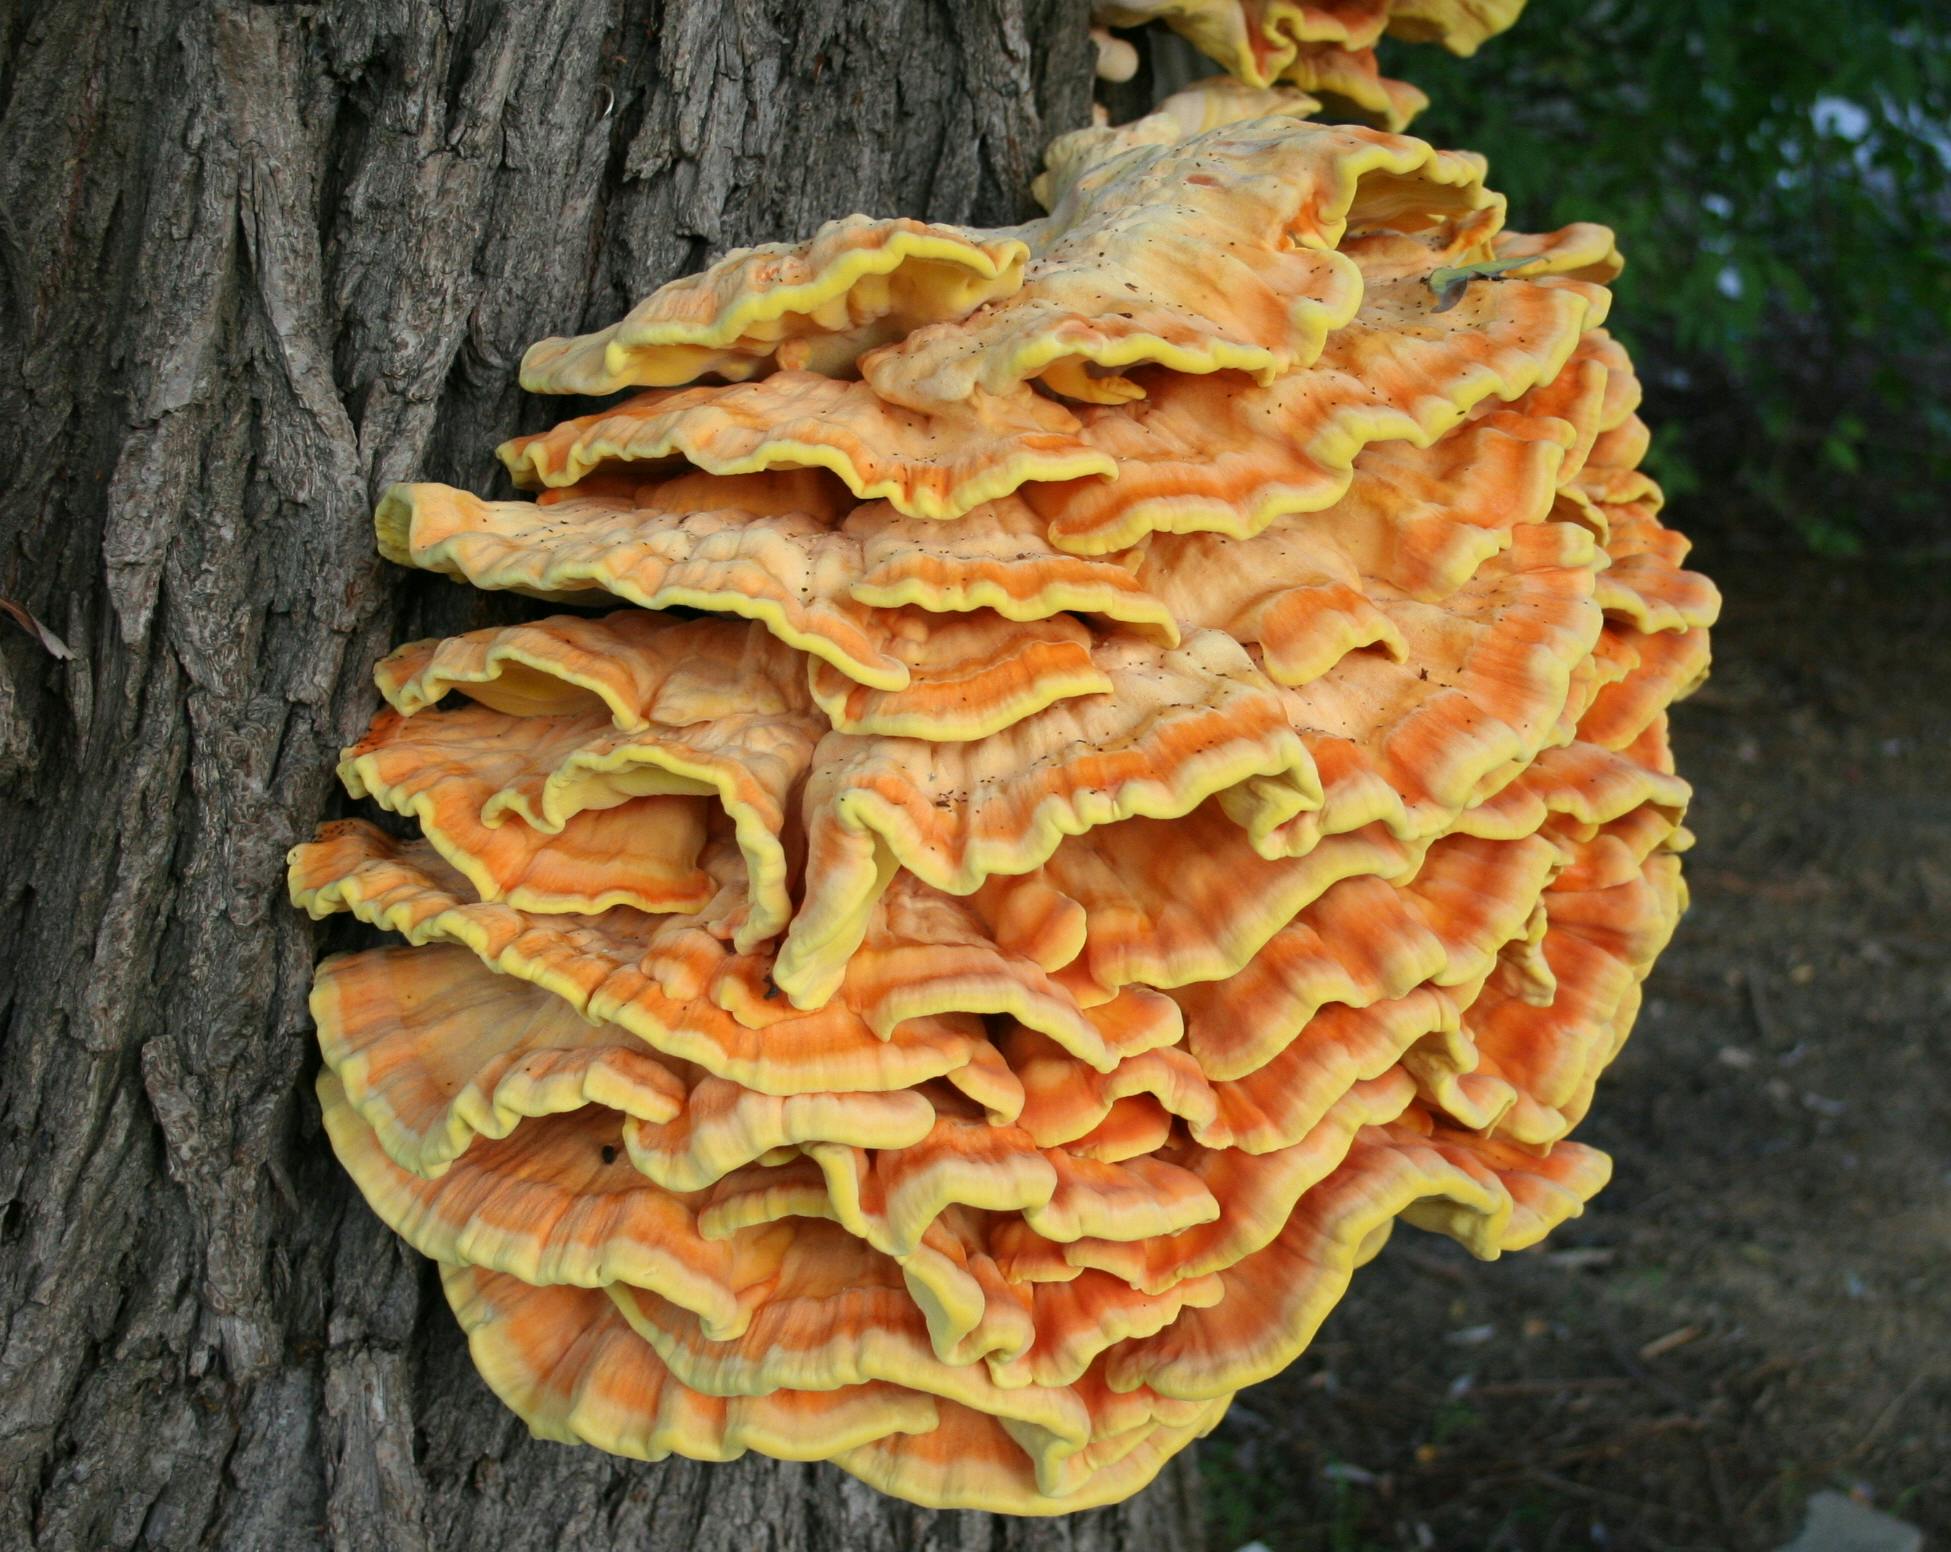 Where to Buy Chicken of the Woods